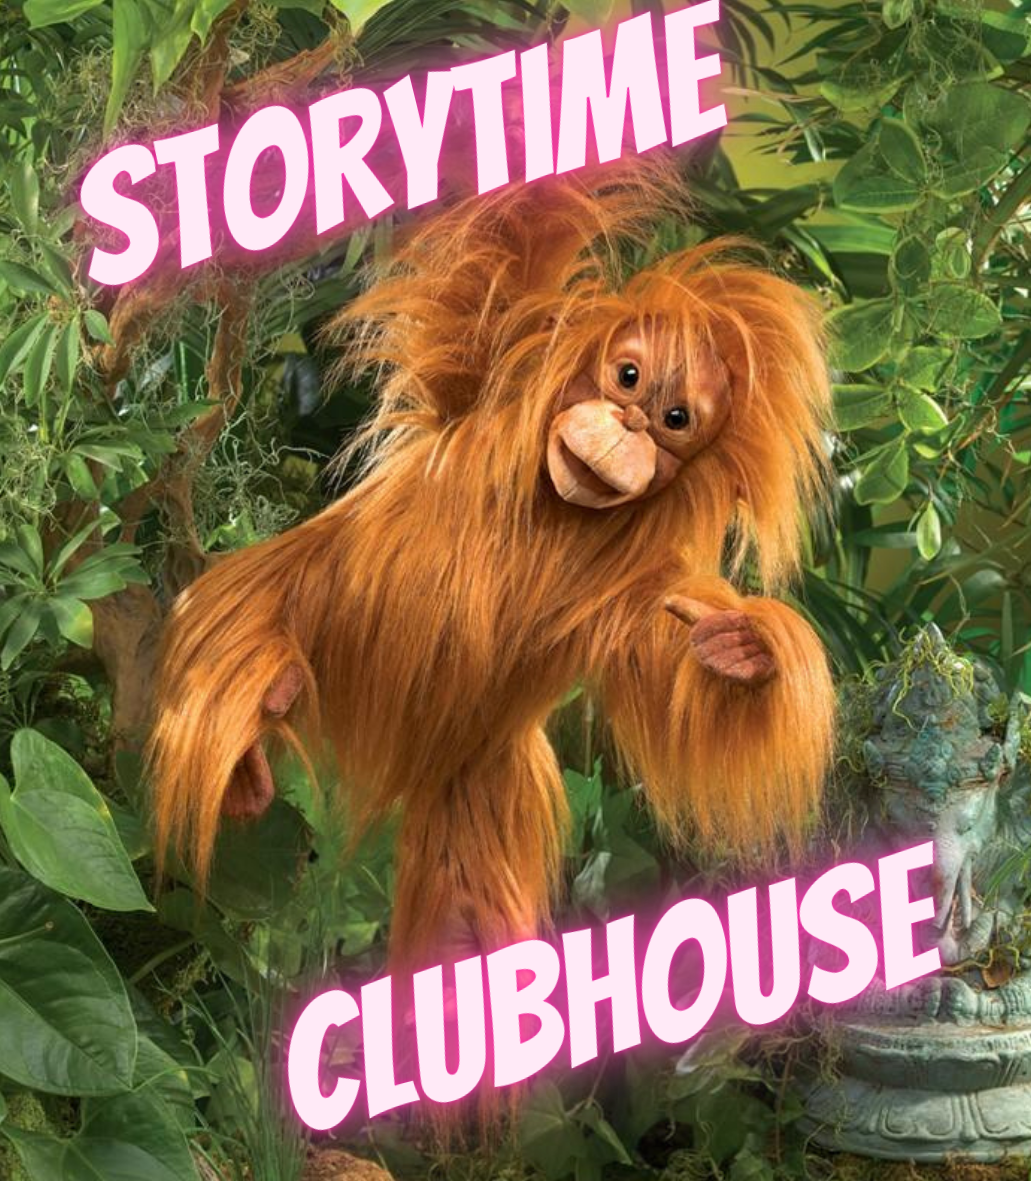 Storytime Clubhouse